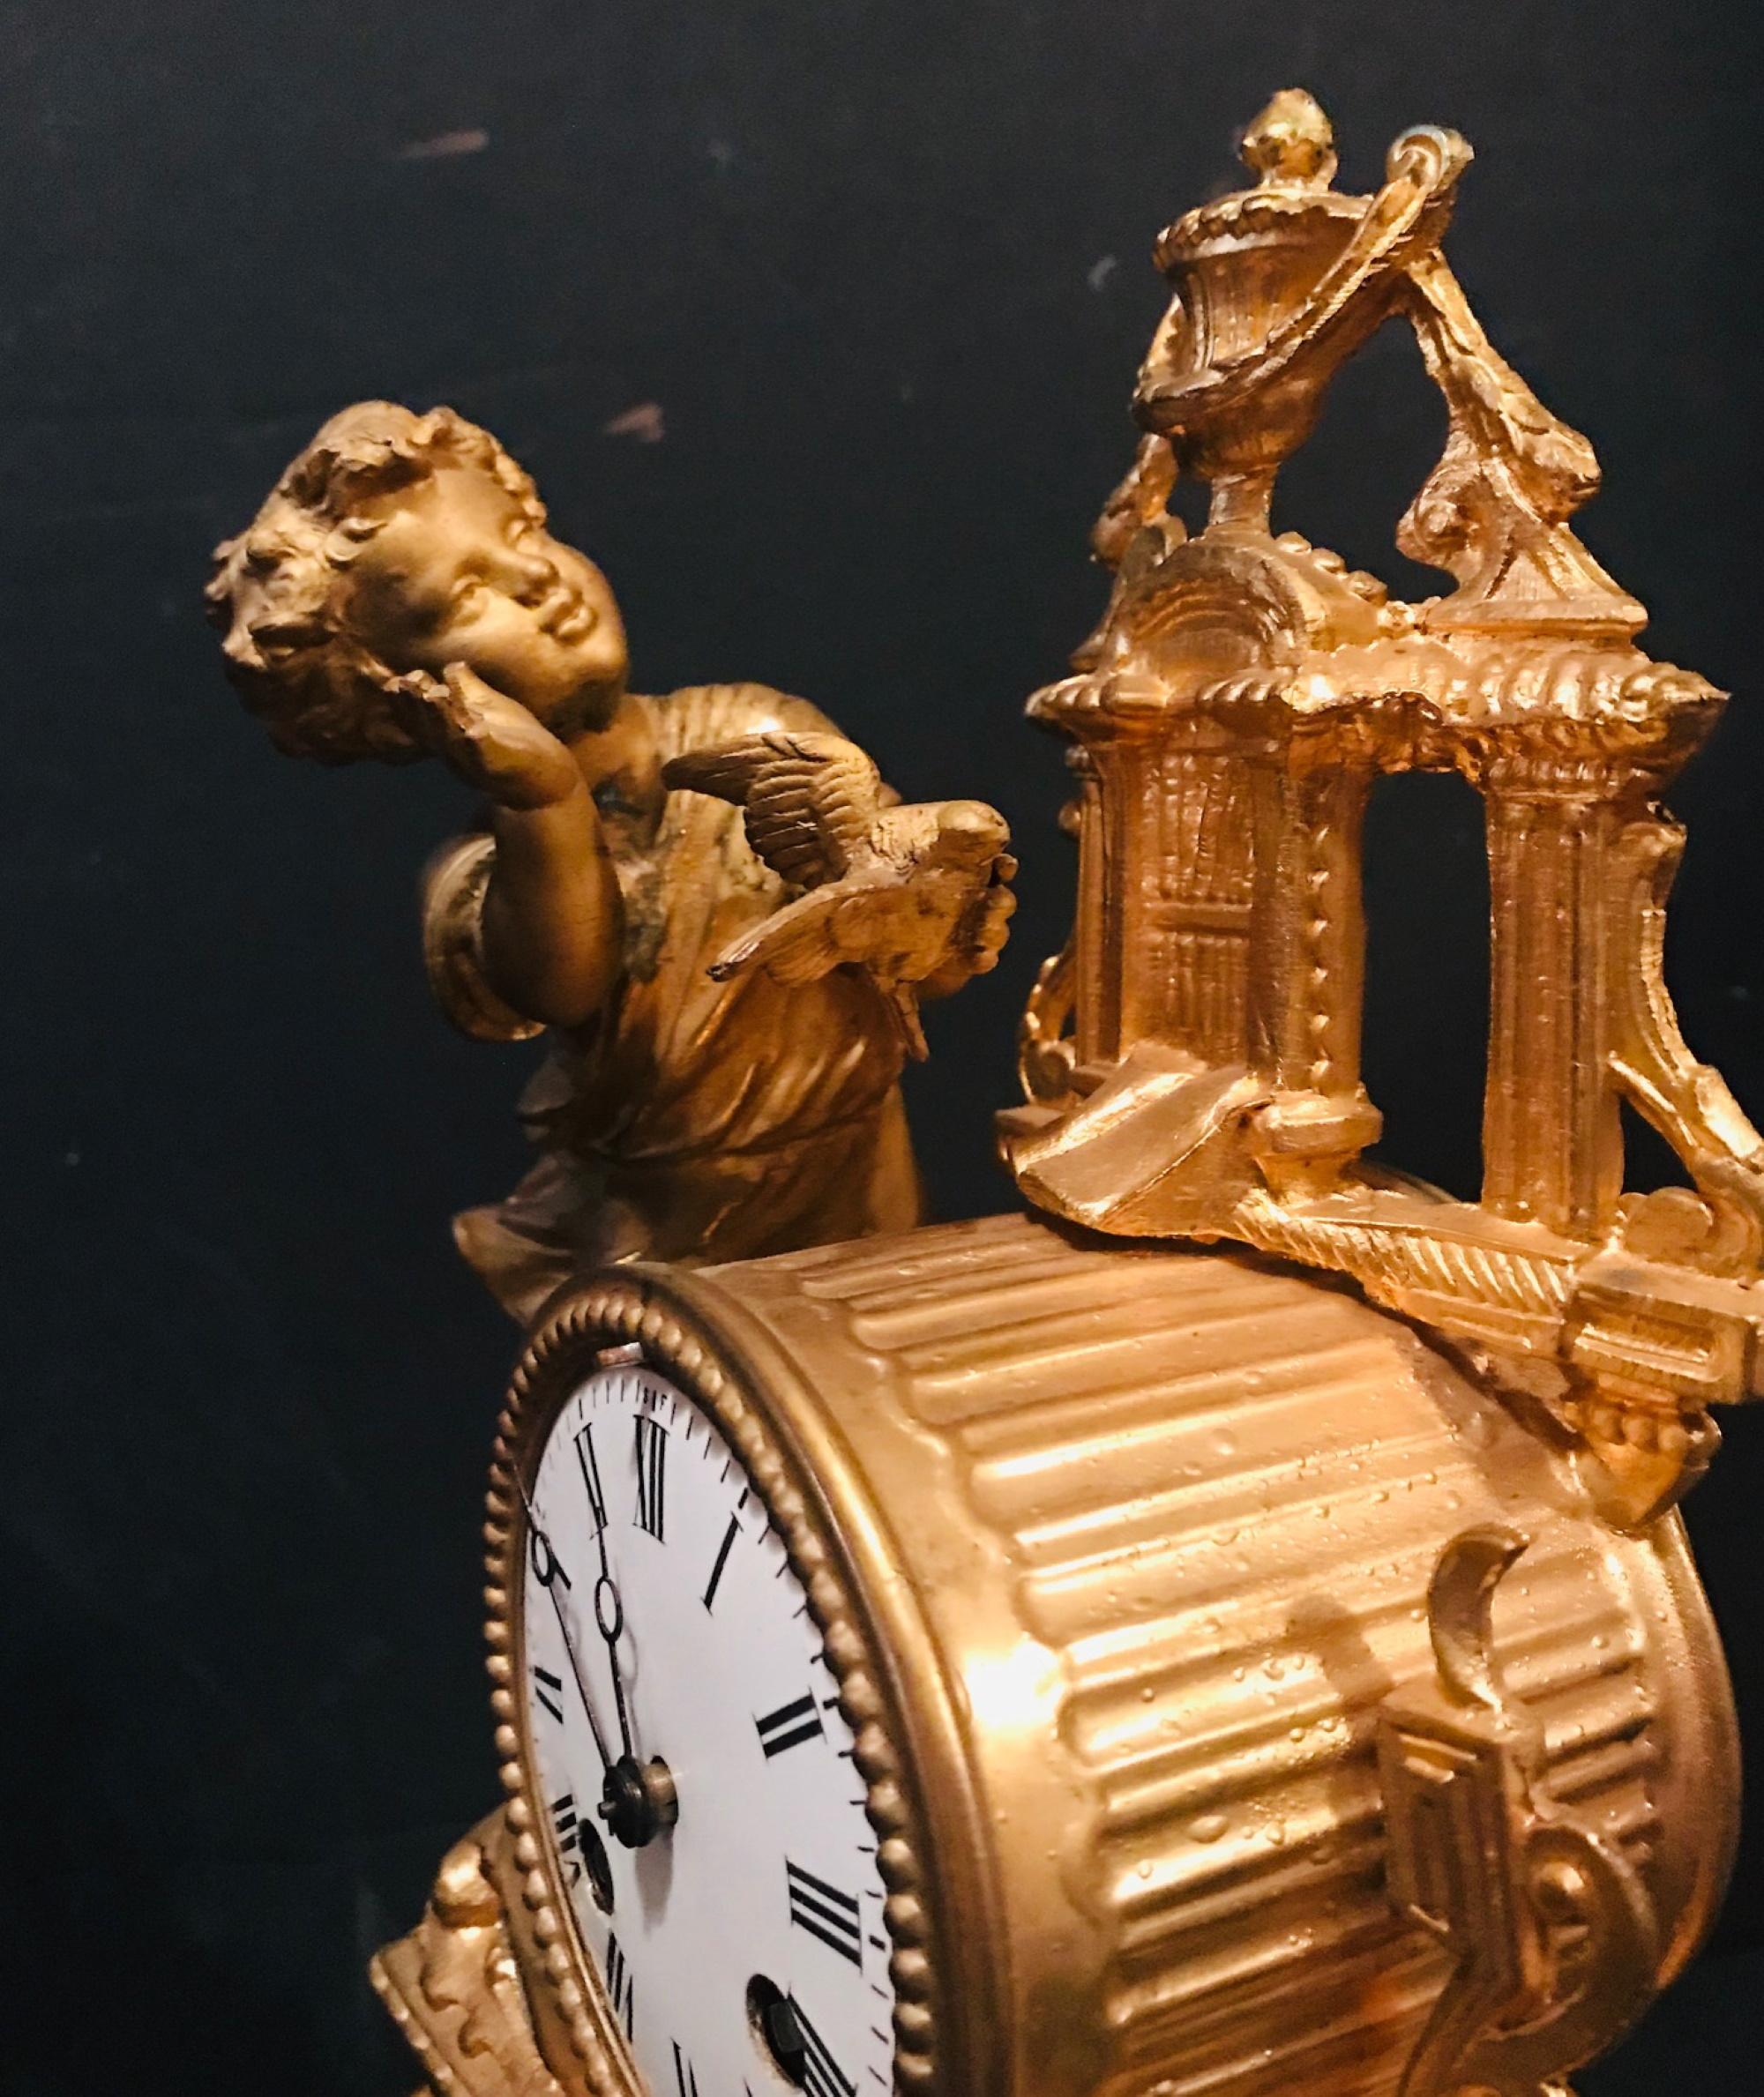 19th Century French Gilt Mantel Clock with Wood Base, Girl with Bird 1